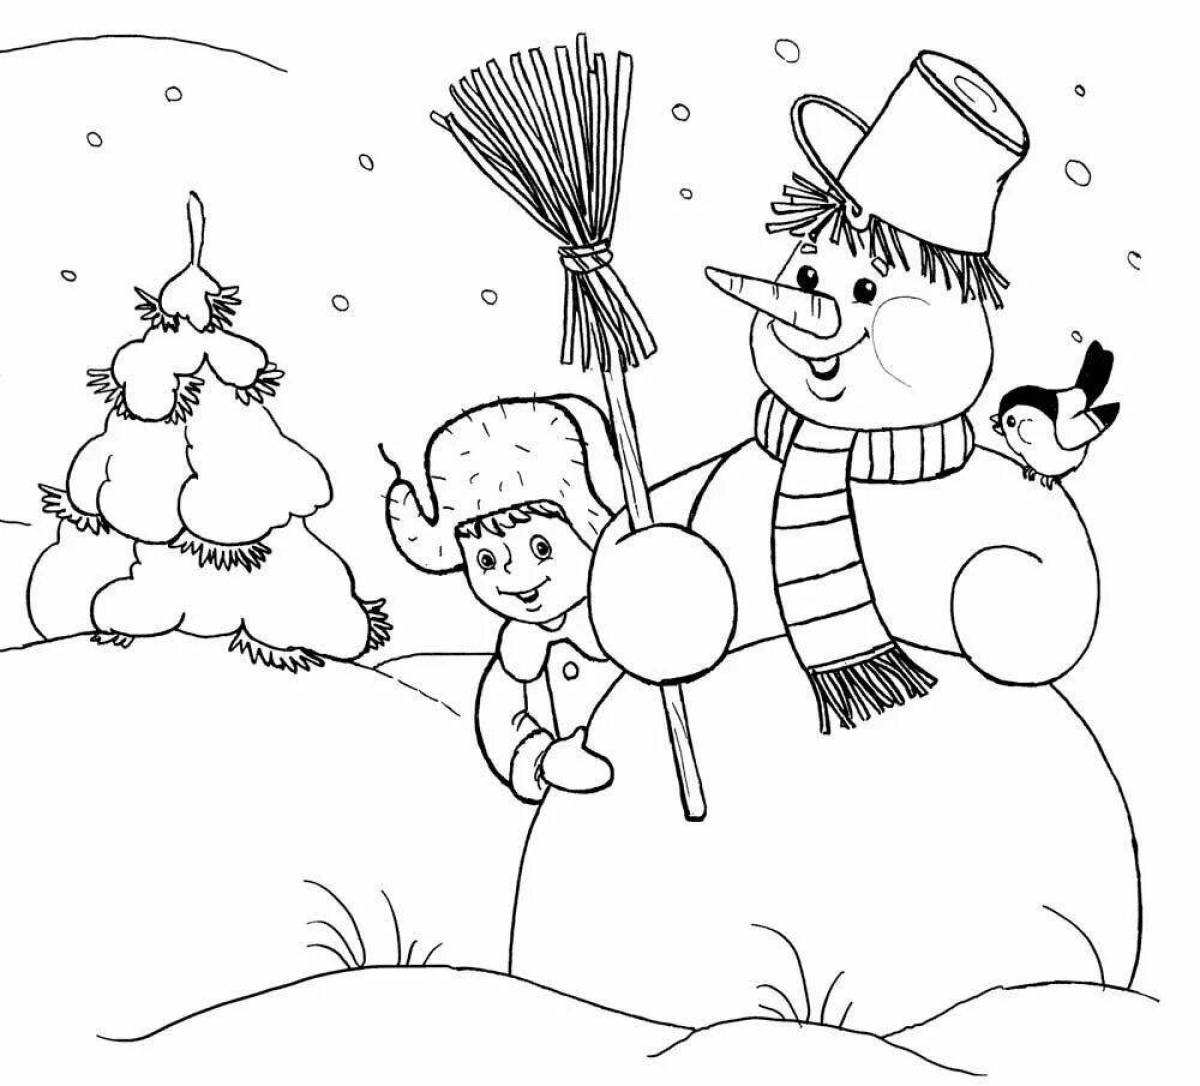 Winter holidays for kids #4